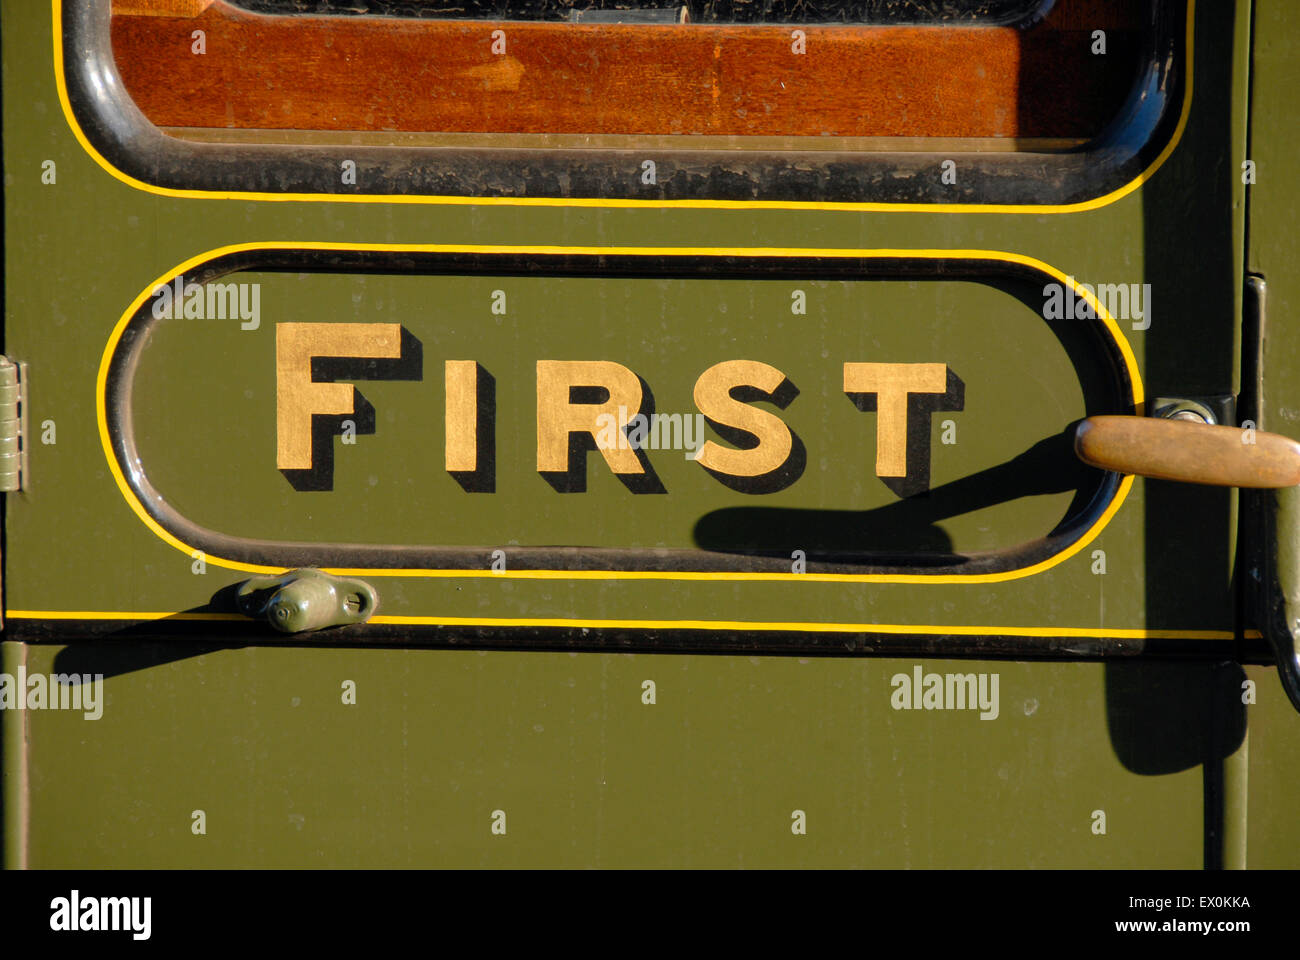 Sign 'First' on railway carriage door Stock Photo